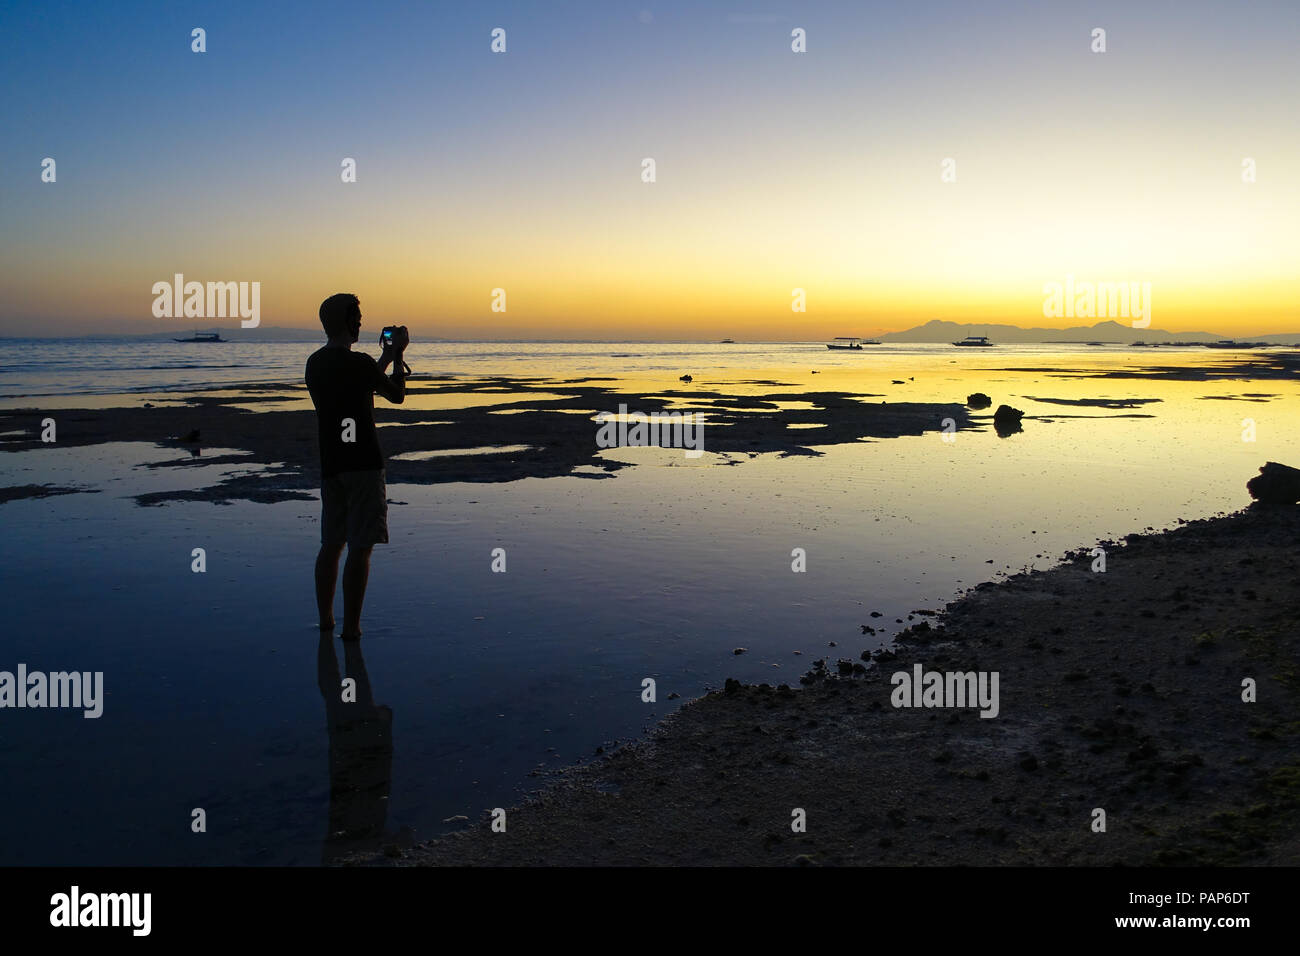 Silhouette of photographer tourist taking photos of a serene sunset beach at low tide - Panglao, Philippines Stock Photo